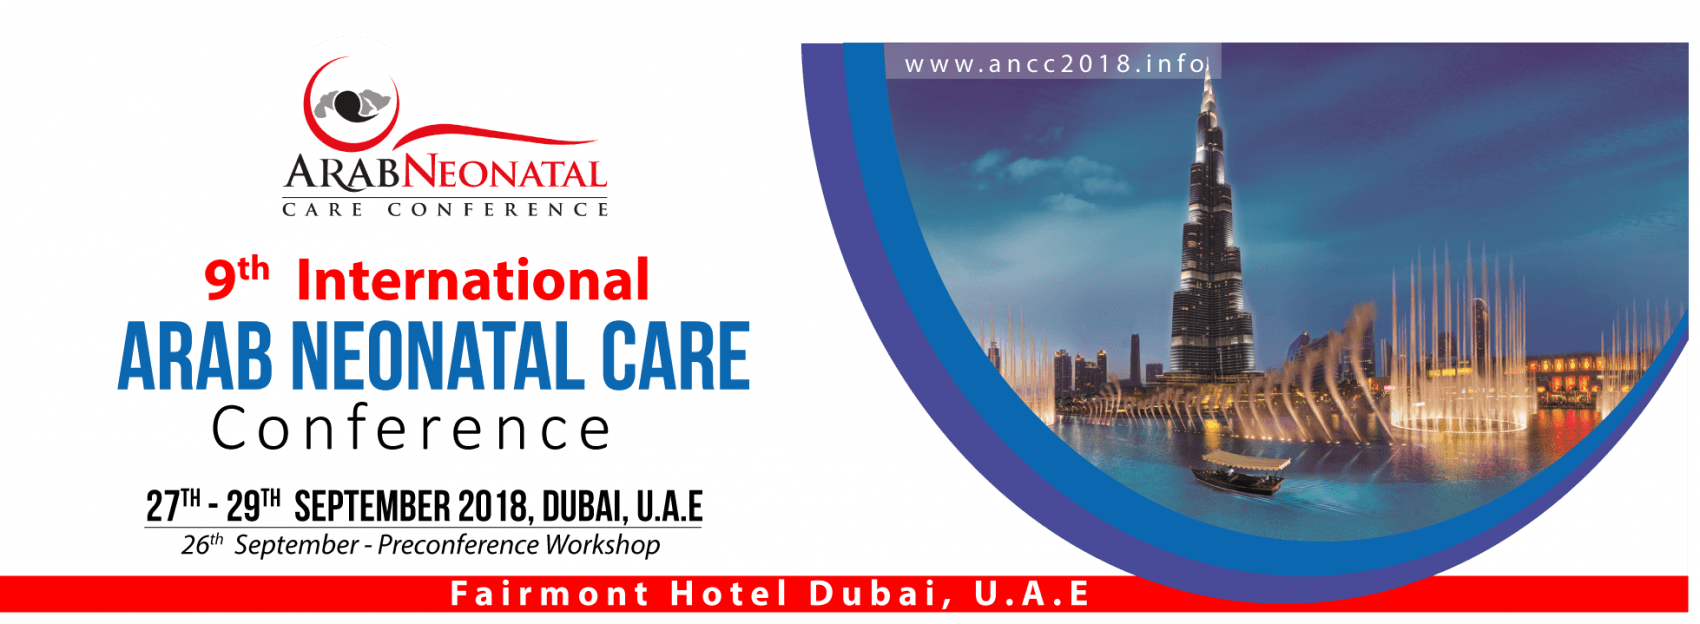 9th International Arab Neonatal Care Conference - Coming Soon in UAE